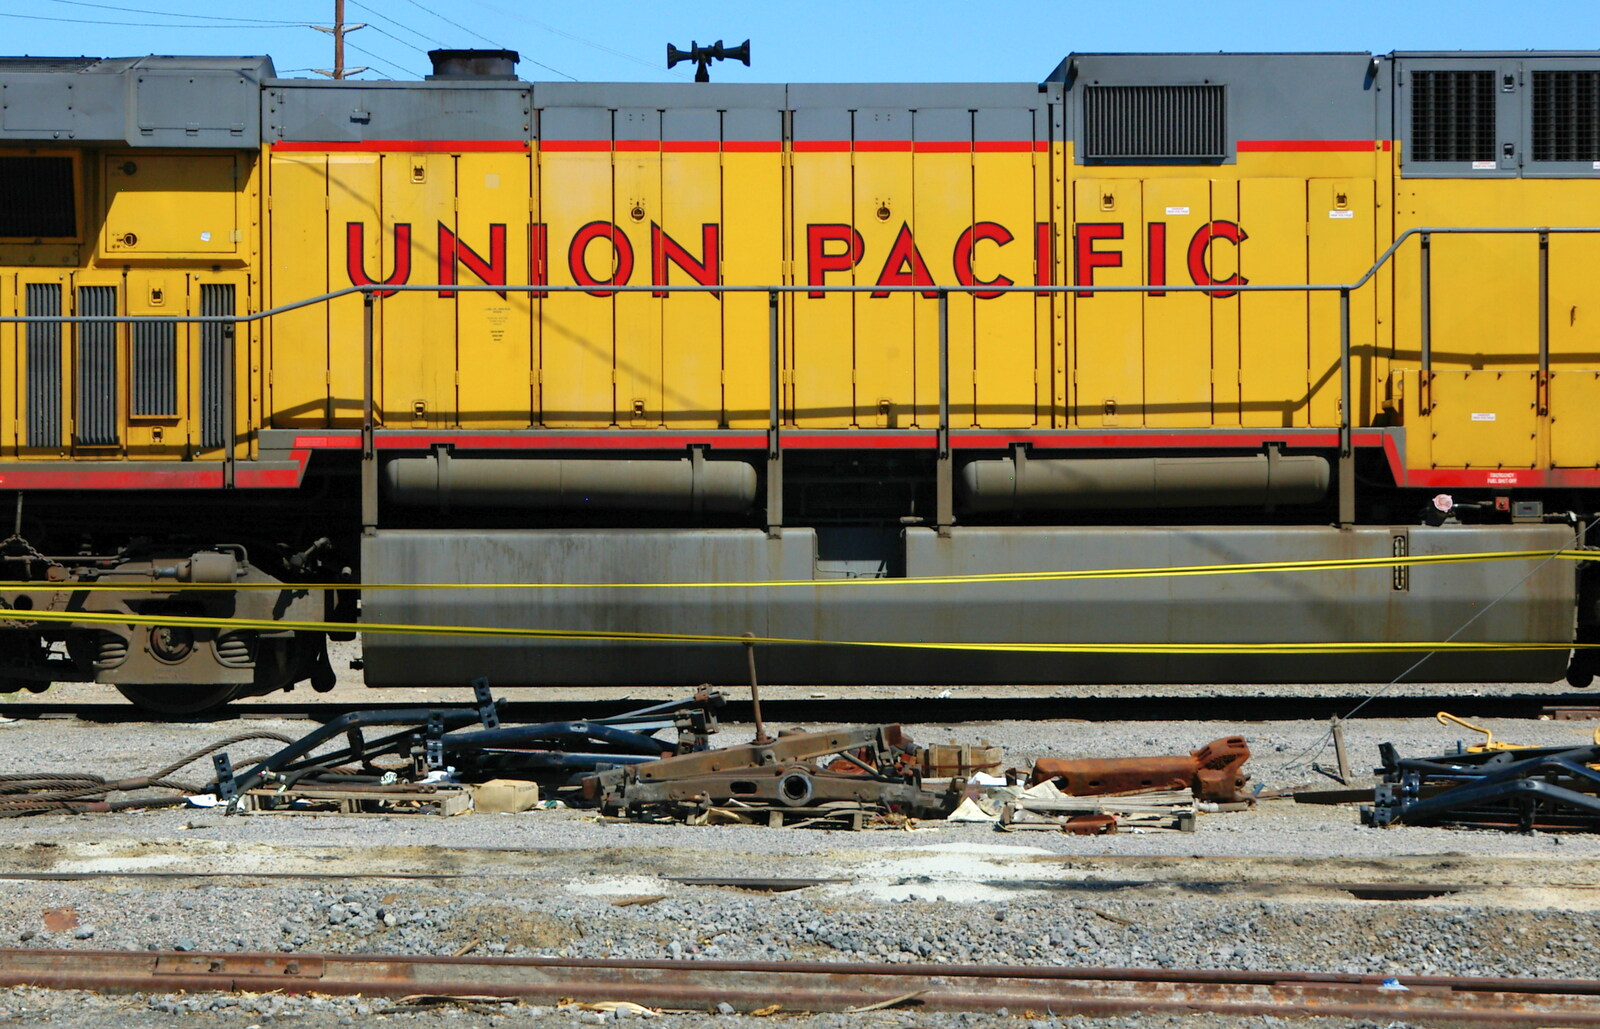 A Union Pacific train from California Desert: El Centro, Imperial Valley, California, US - 24th September 2005